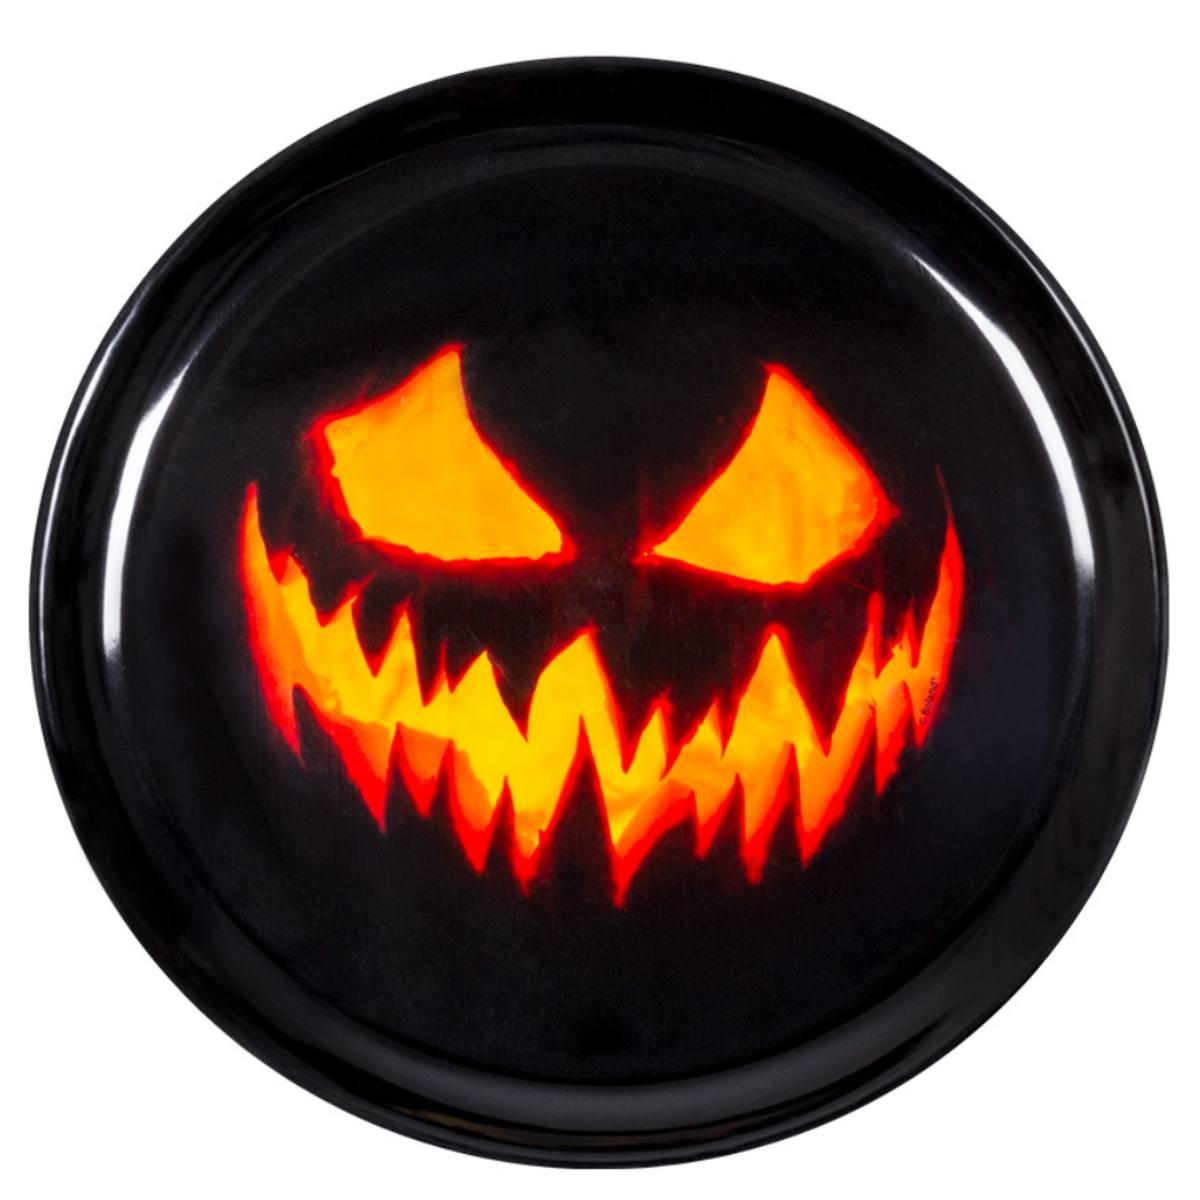 Creepy Pumpkin Halloween Plastic Platter 34.5cm by Palmers 5855G available here at Karnival Costumes online party shop